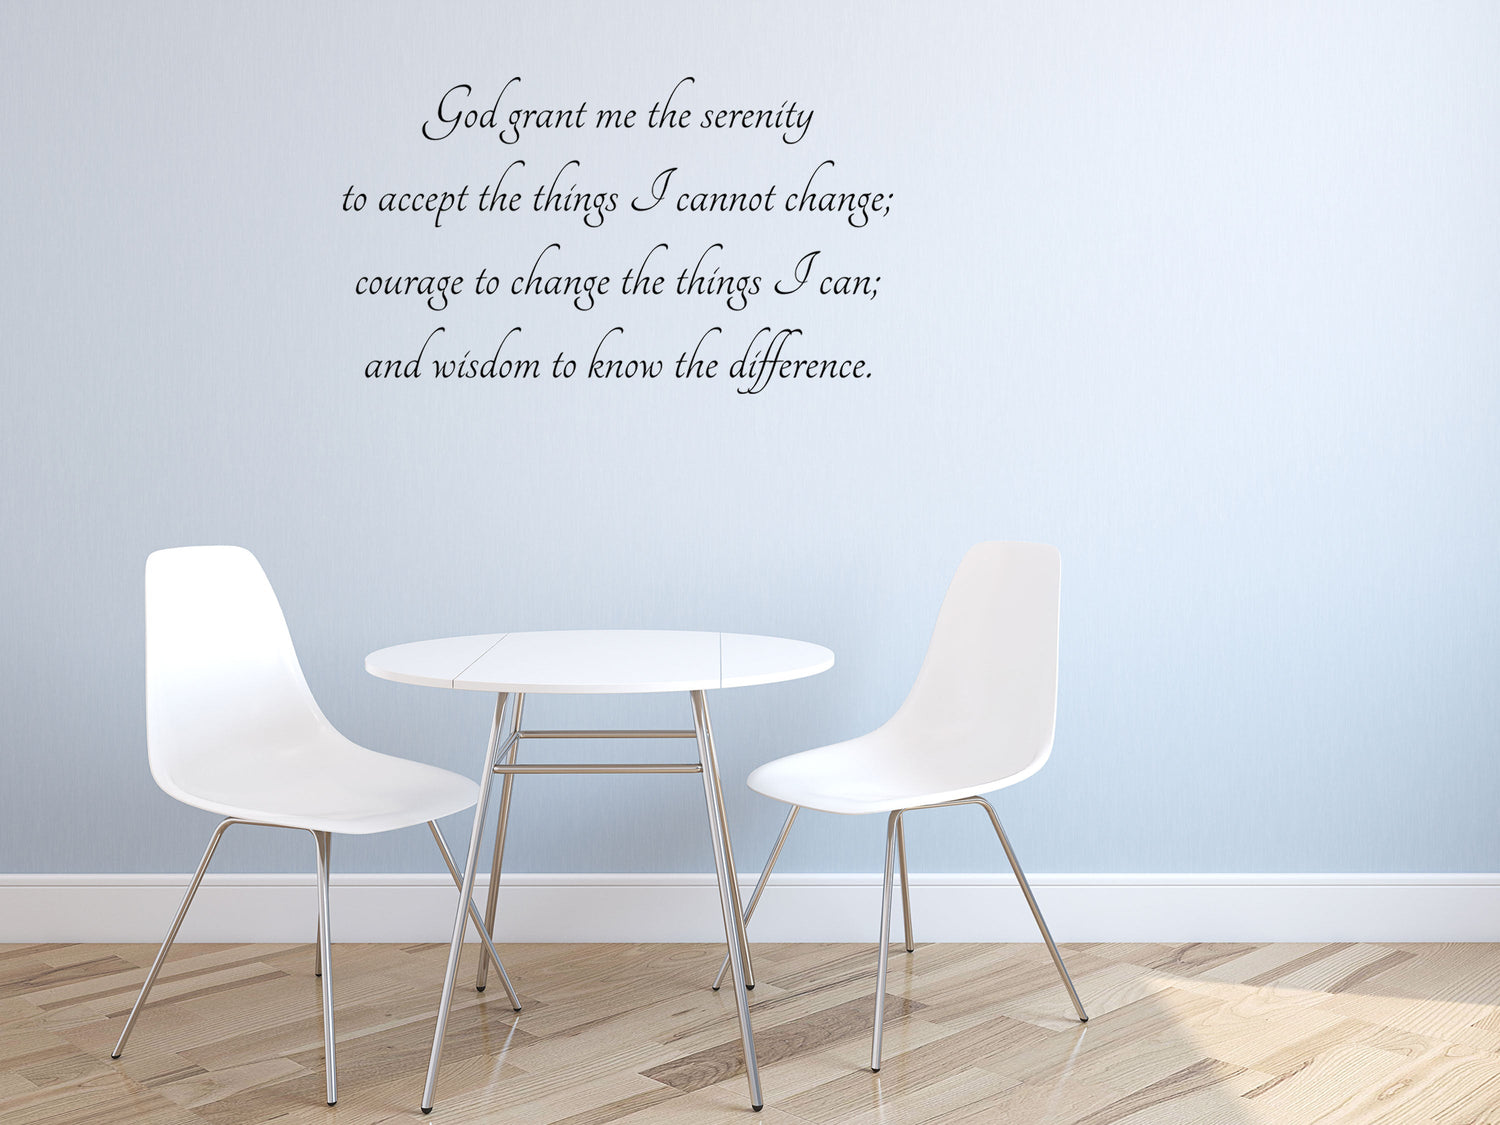 Serenity Prayer, God Grant Me The Serenity Vinyl Wall Decal Inspirational Wall Signs 